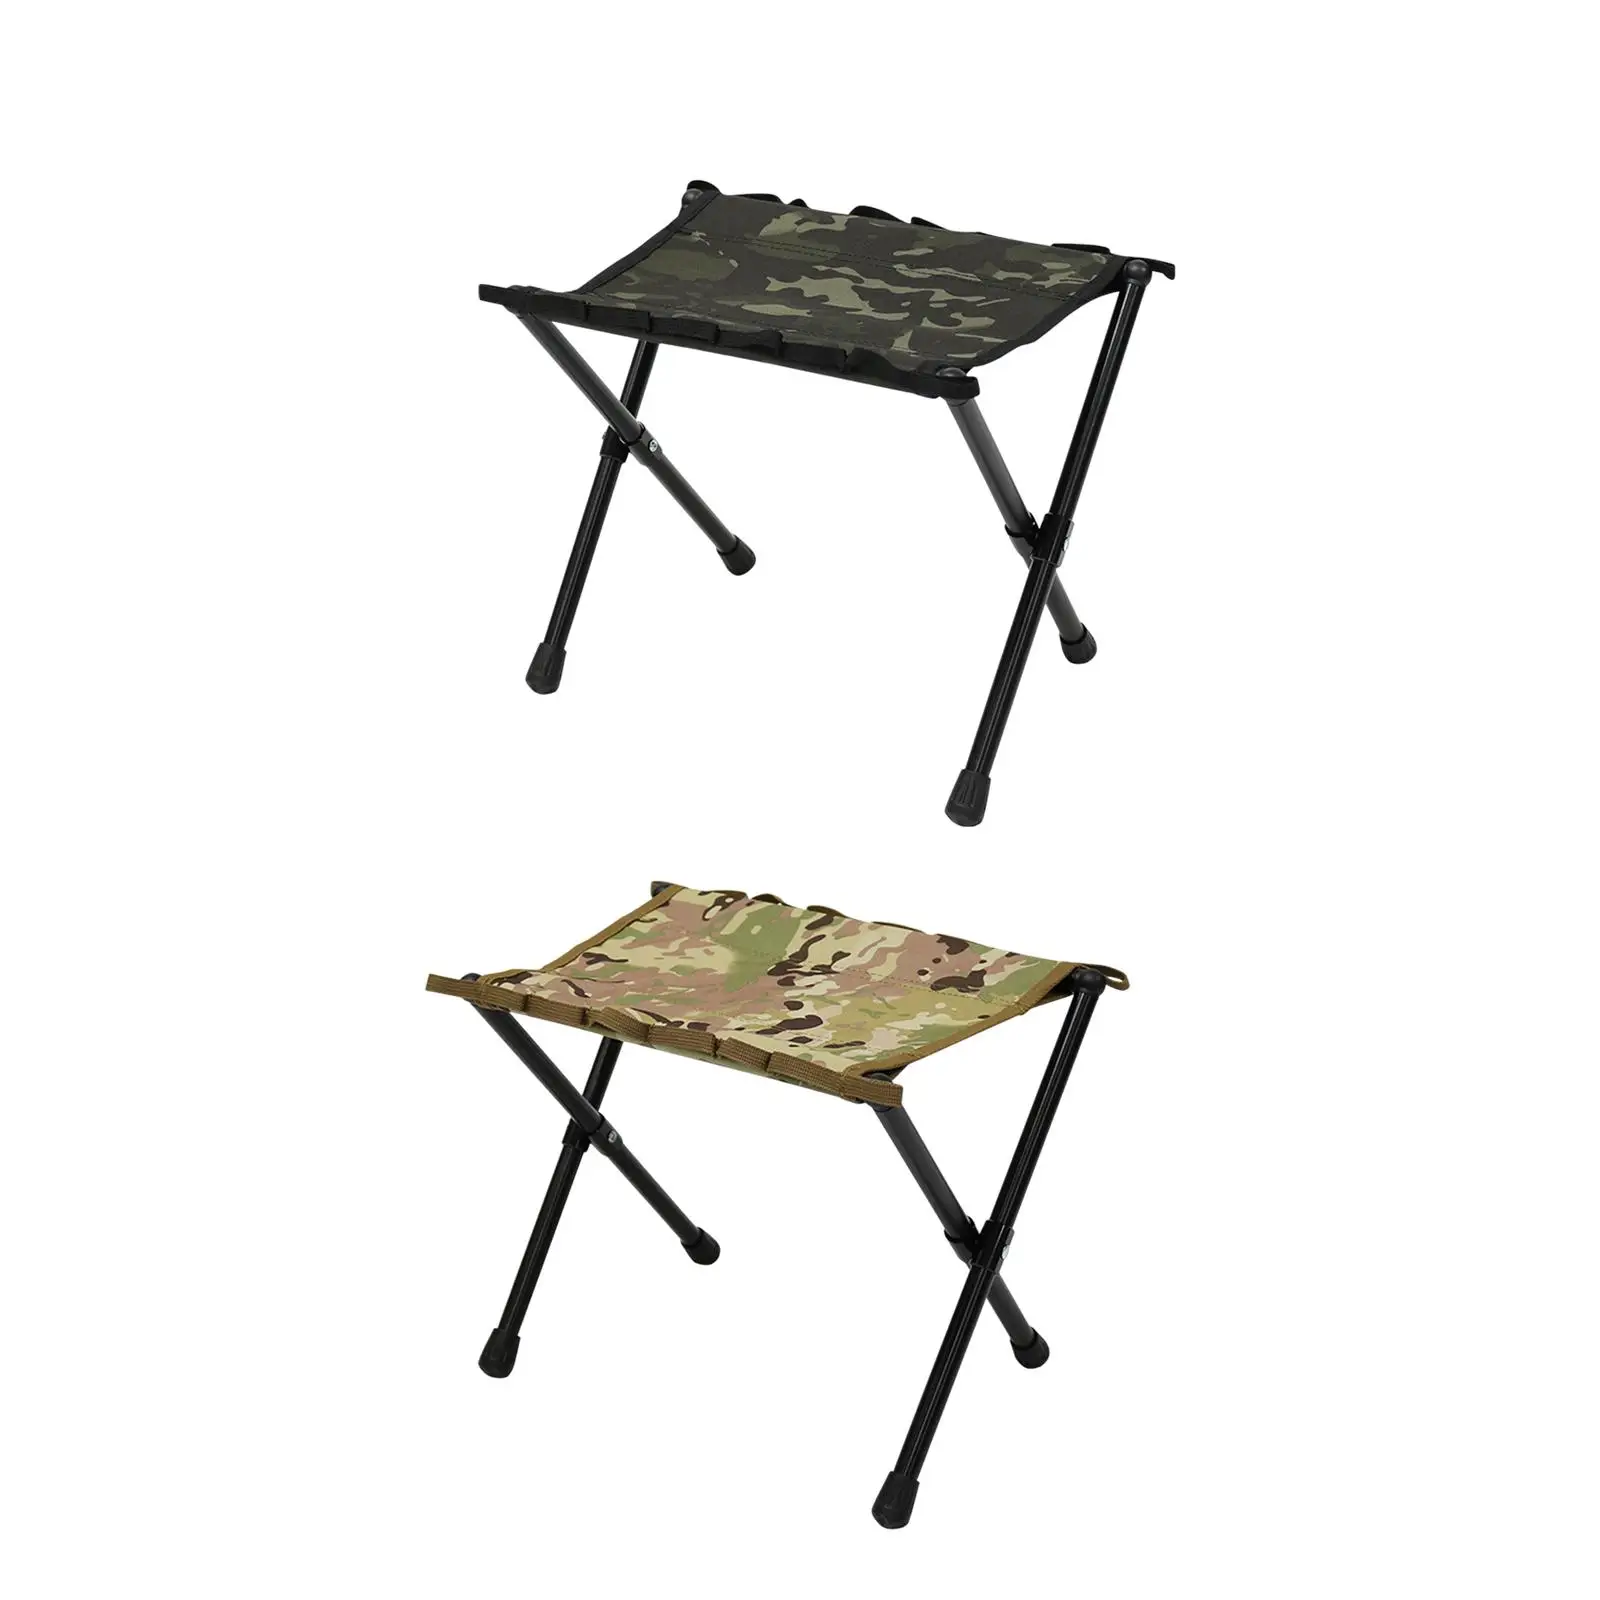 Camping Stools Folding Adults Outdoor Foldable Footstool Portable Fishing Chairs for Picnic Travel Fishing Barbecue